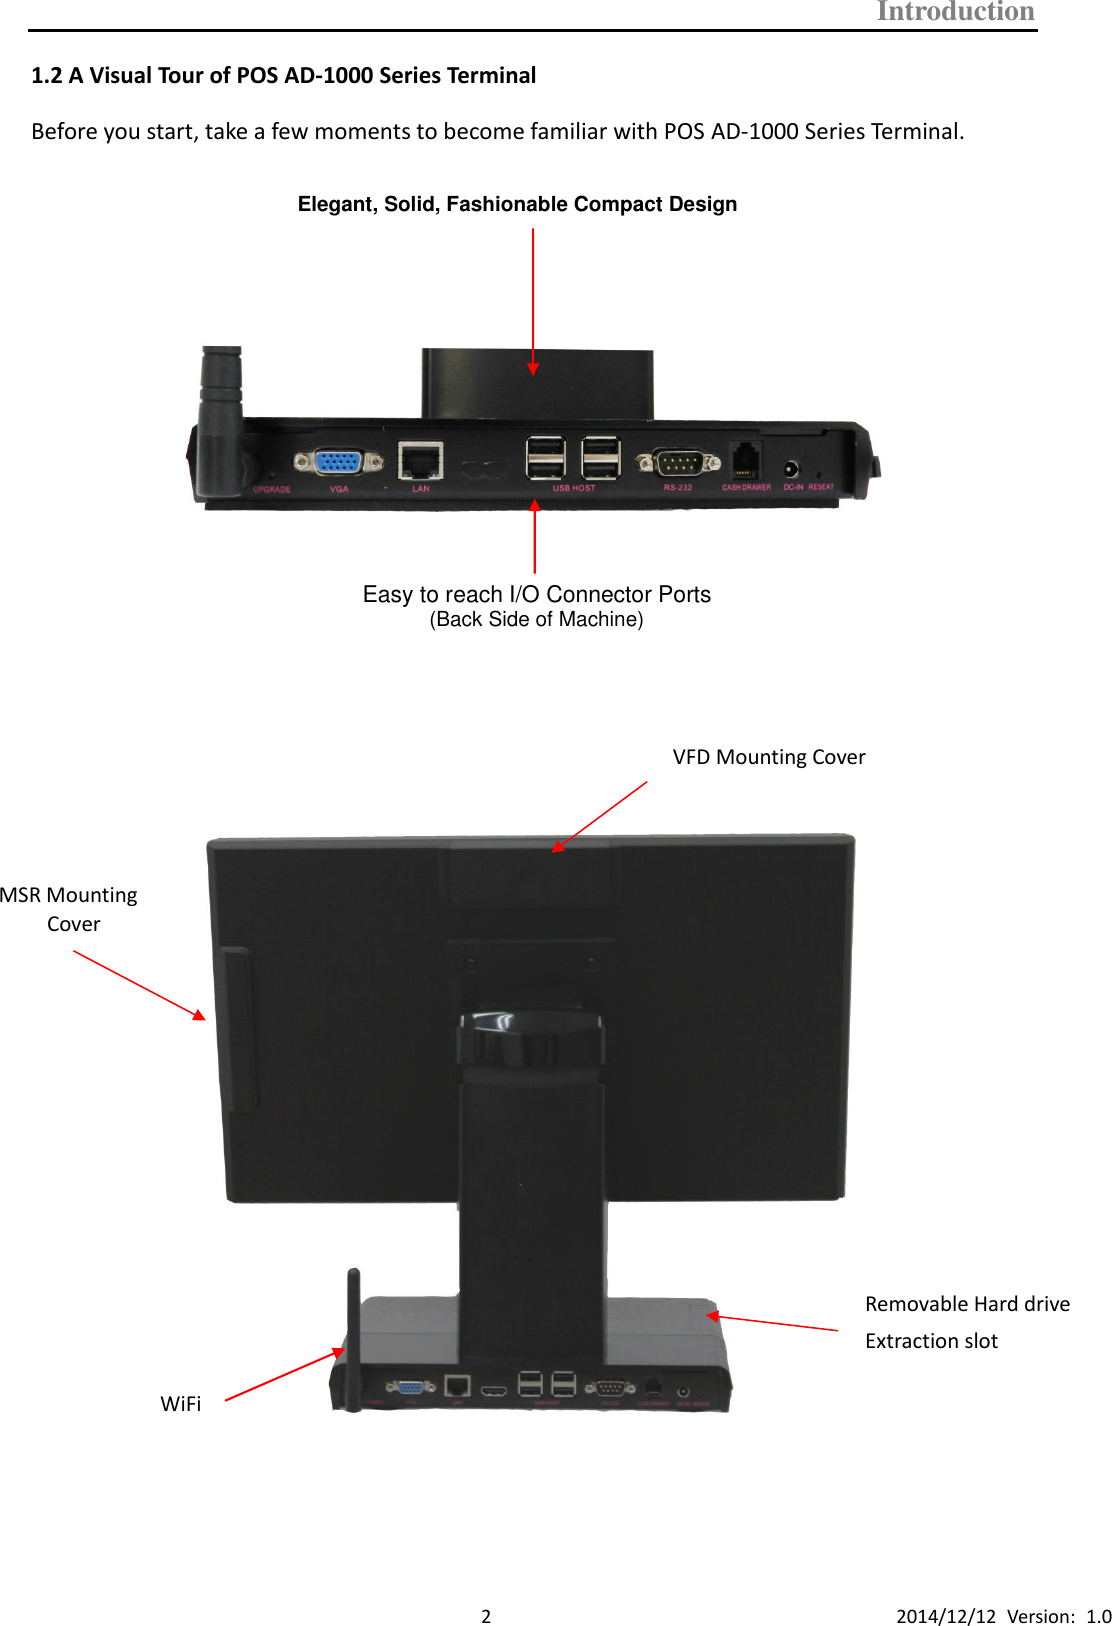 Introduction      2 2014/12/12  Version:  1.0 1.2 A Visual Tour of POS AD-1000 Series Terminal Before you start, take a few moments to become familiar with POS AD-1000 Series Terminal.                     Easy to reach I/O Connector Ports (Back Side of Machine) Elegant, Solid, Fashionable Compact Design VFD Mounting Cover Removable Hard drive Extraction slot MSR Mounting   Cover WiFi 